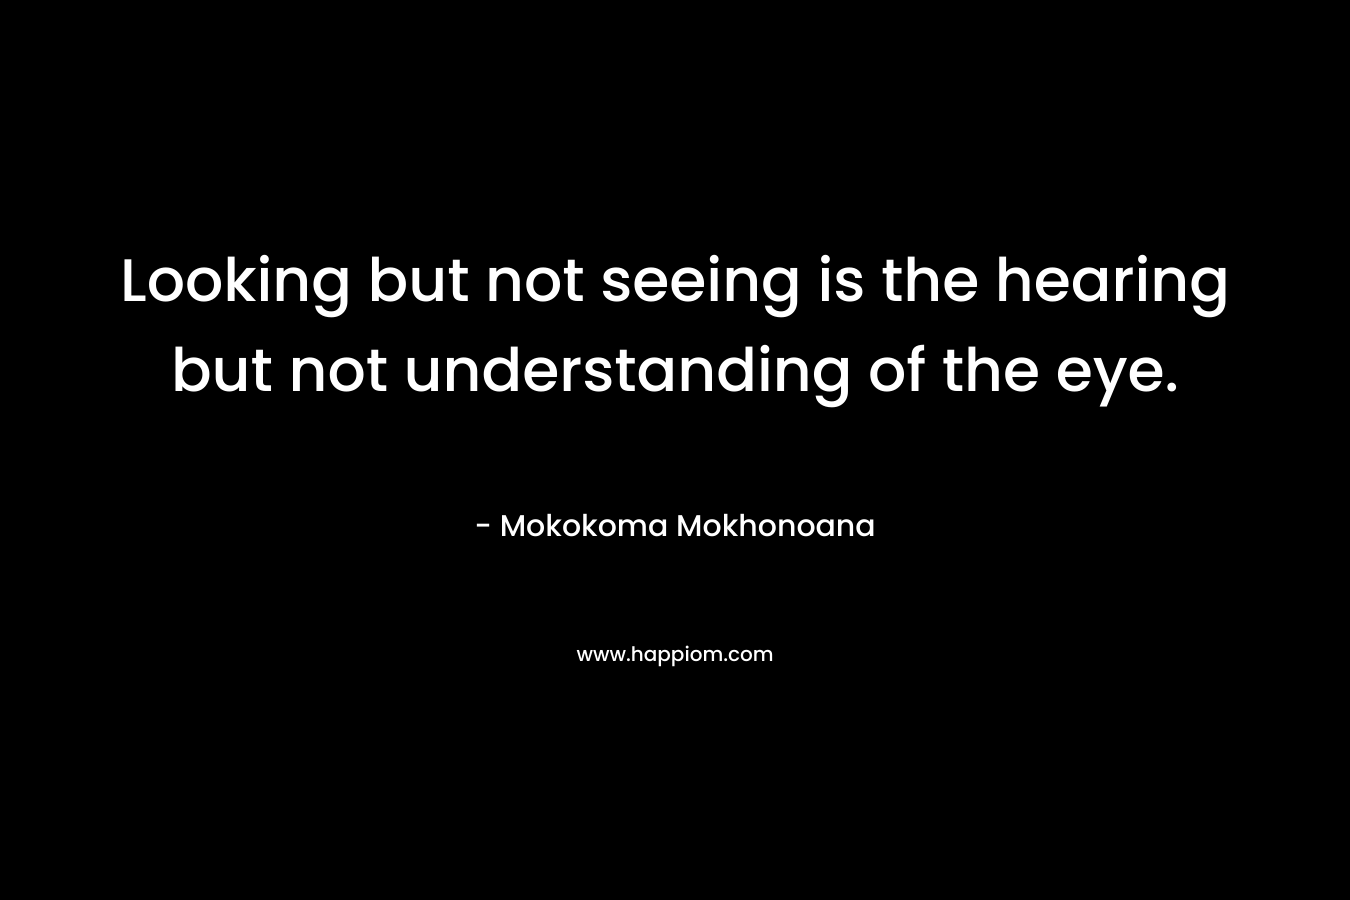 Looking but not seeing is the hearing but not understanding of the eye.